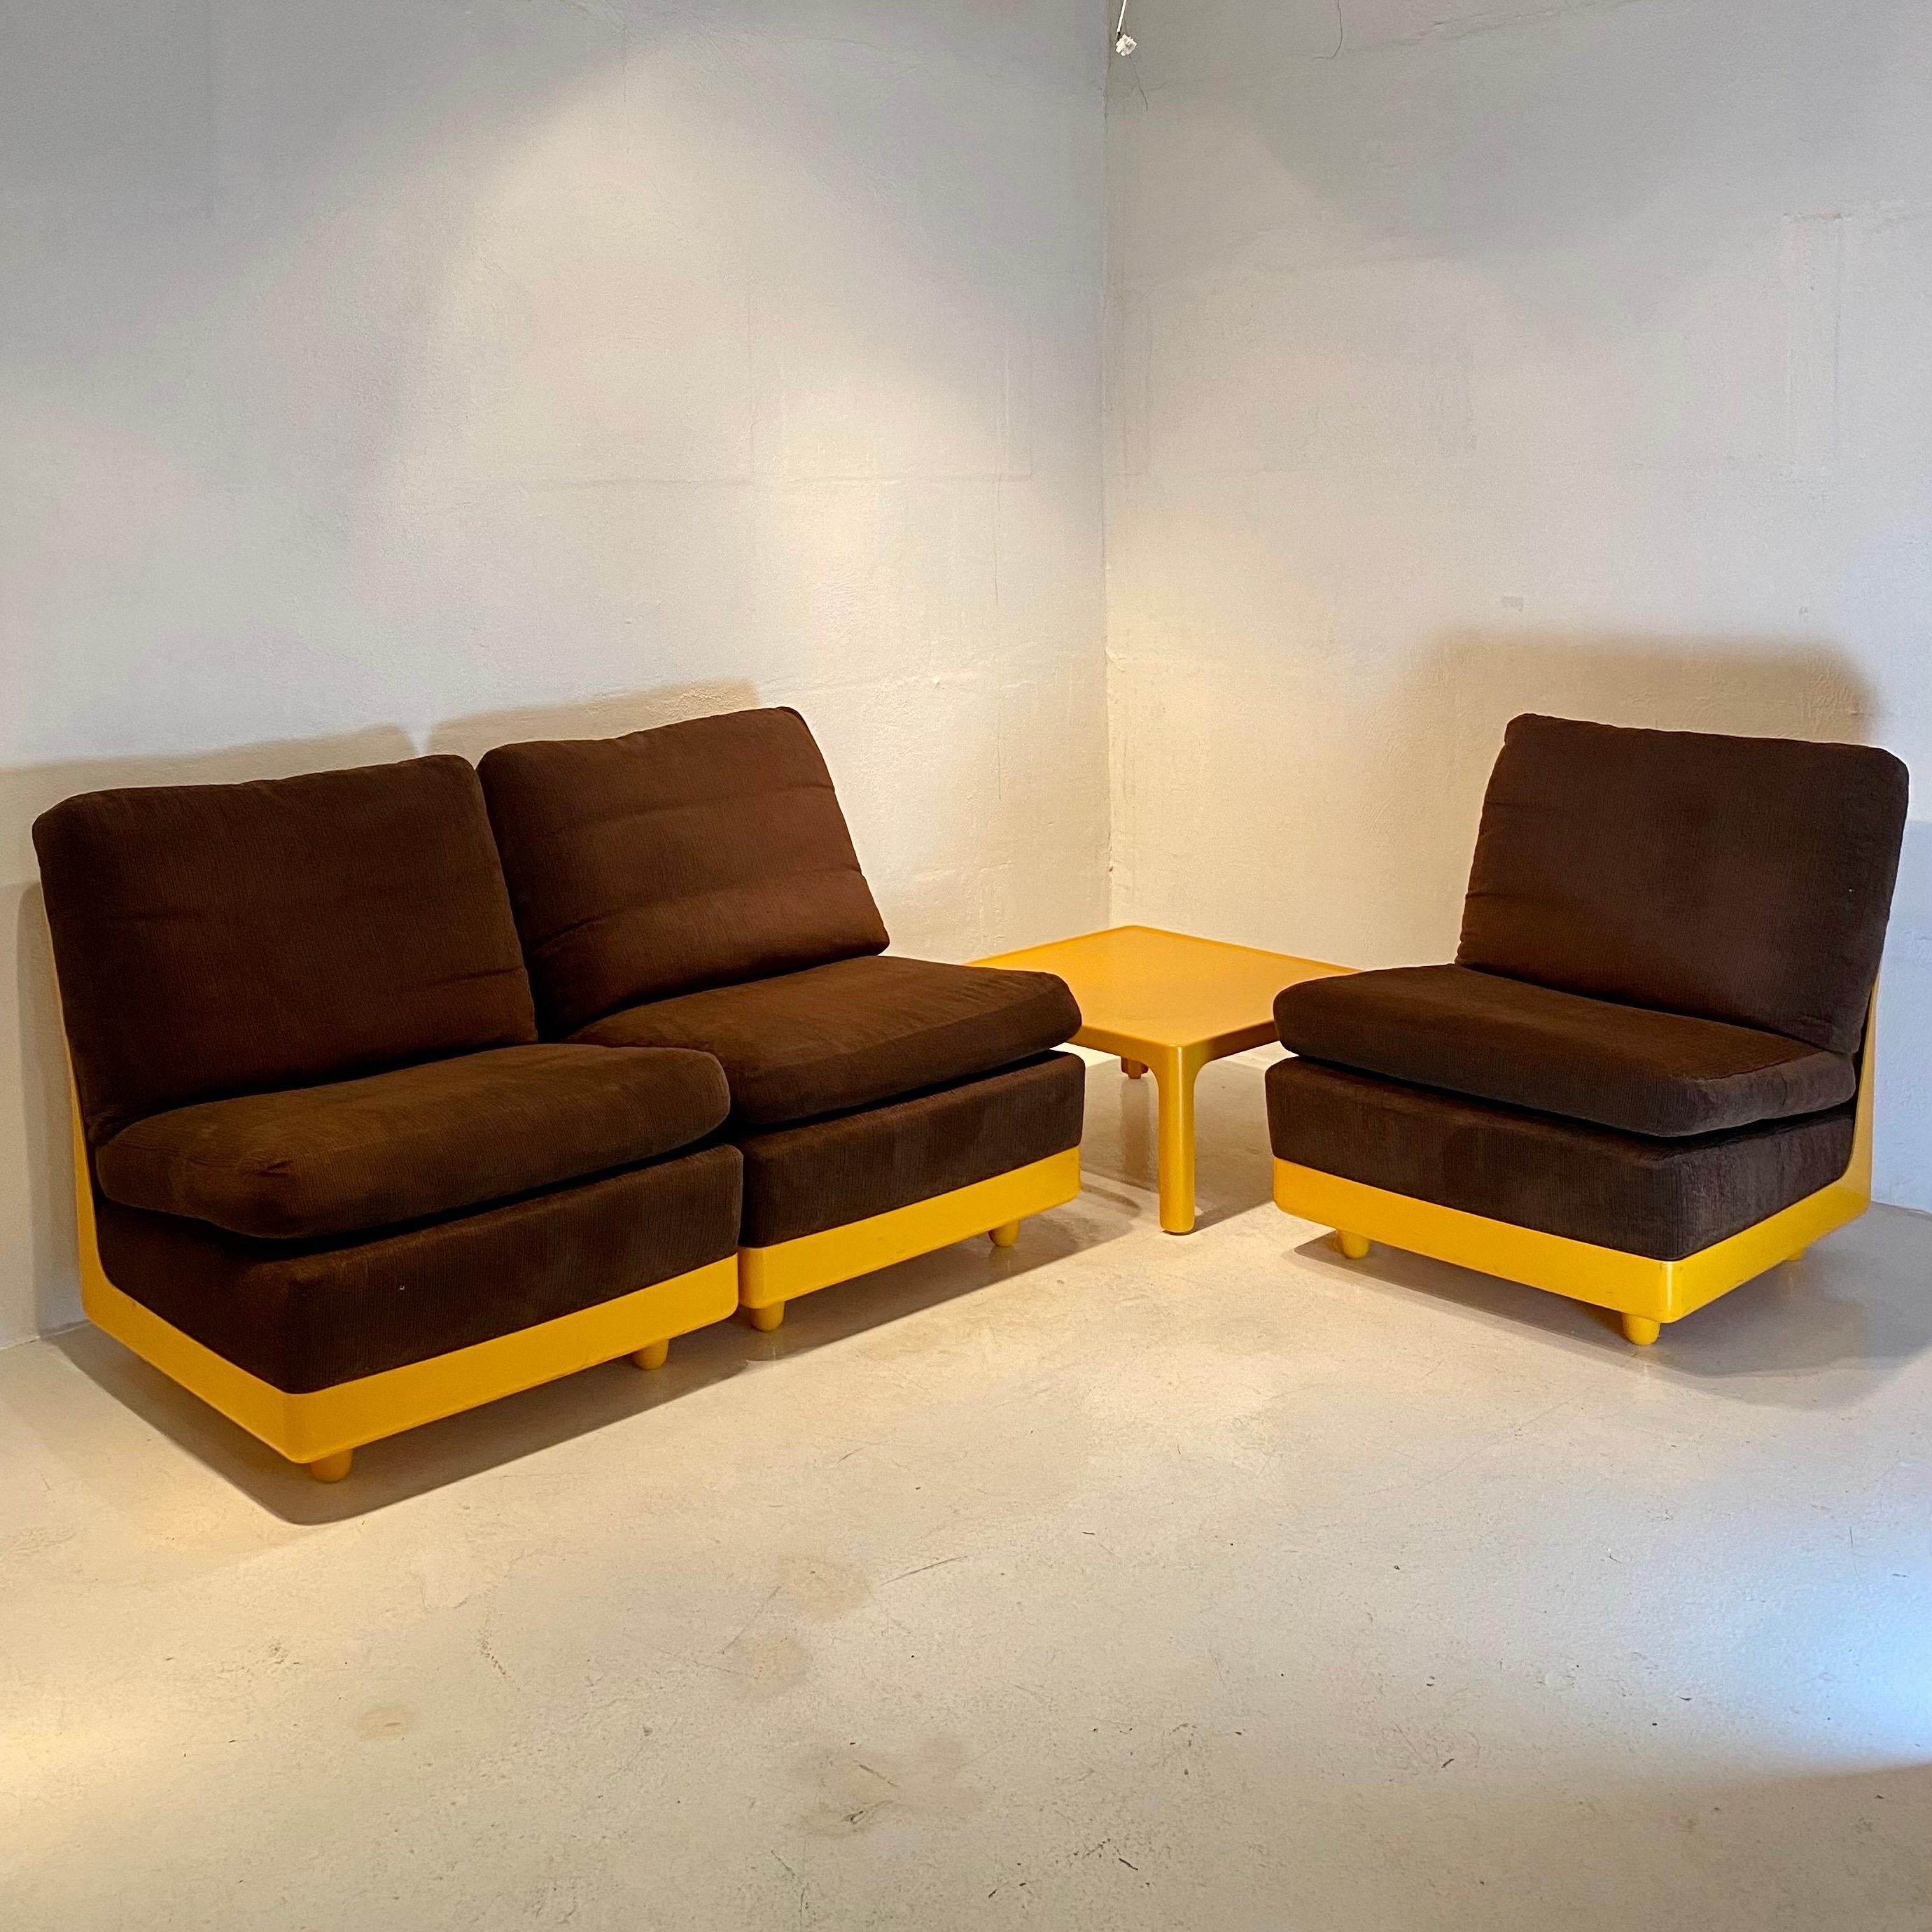 Original set of three yellow seats and coffee table by Wolfgang Feierbach 1974. For Sale 3